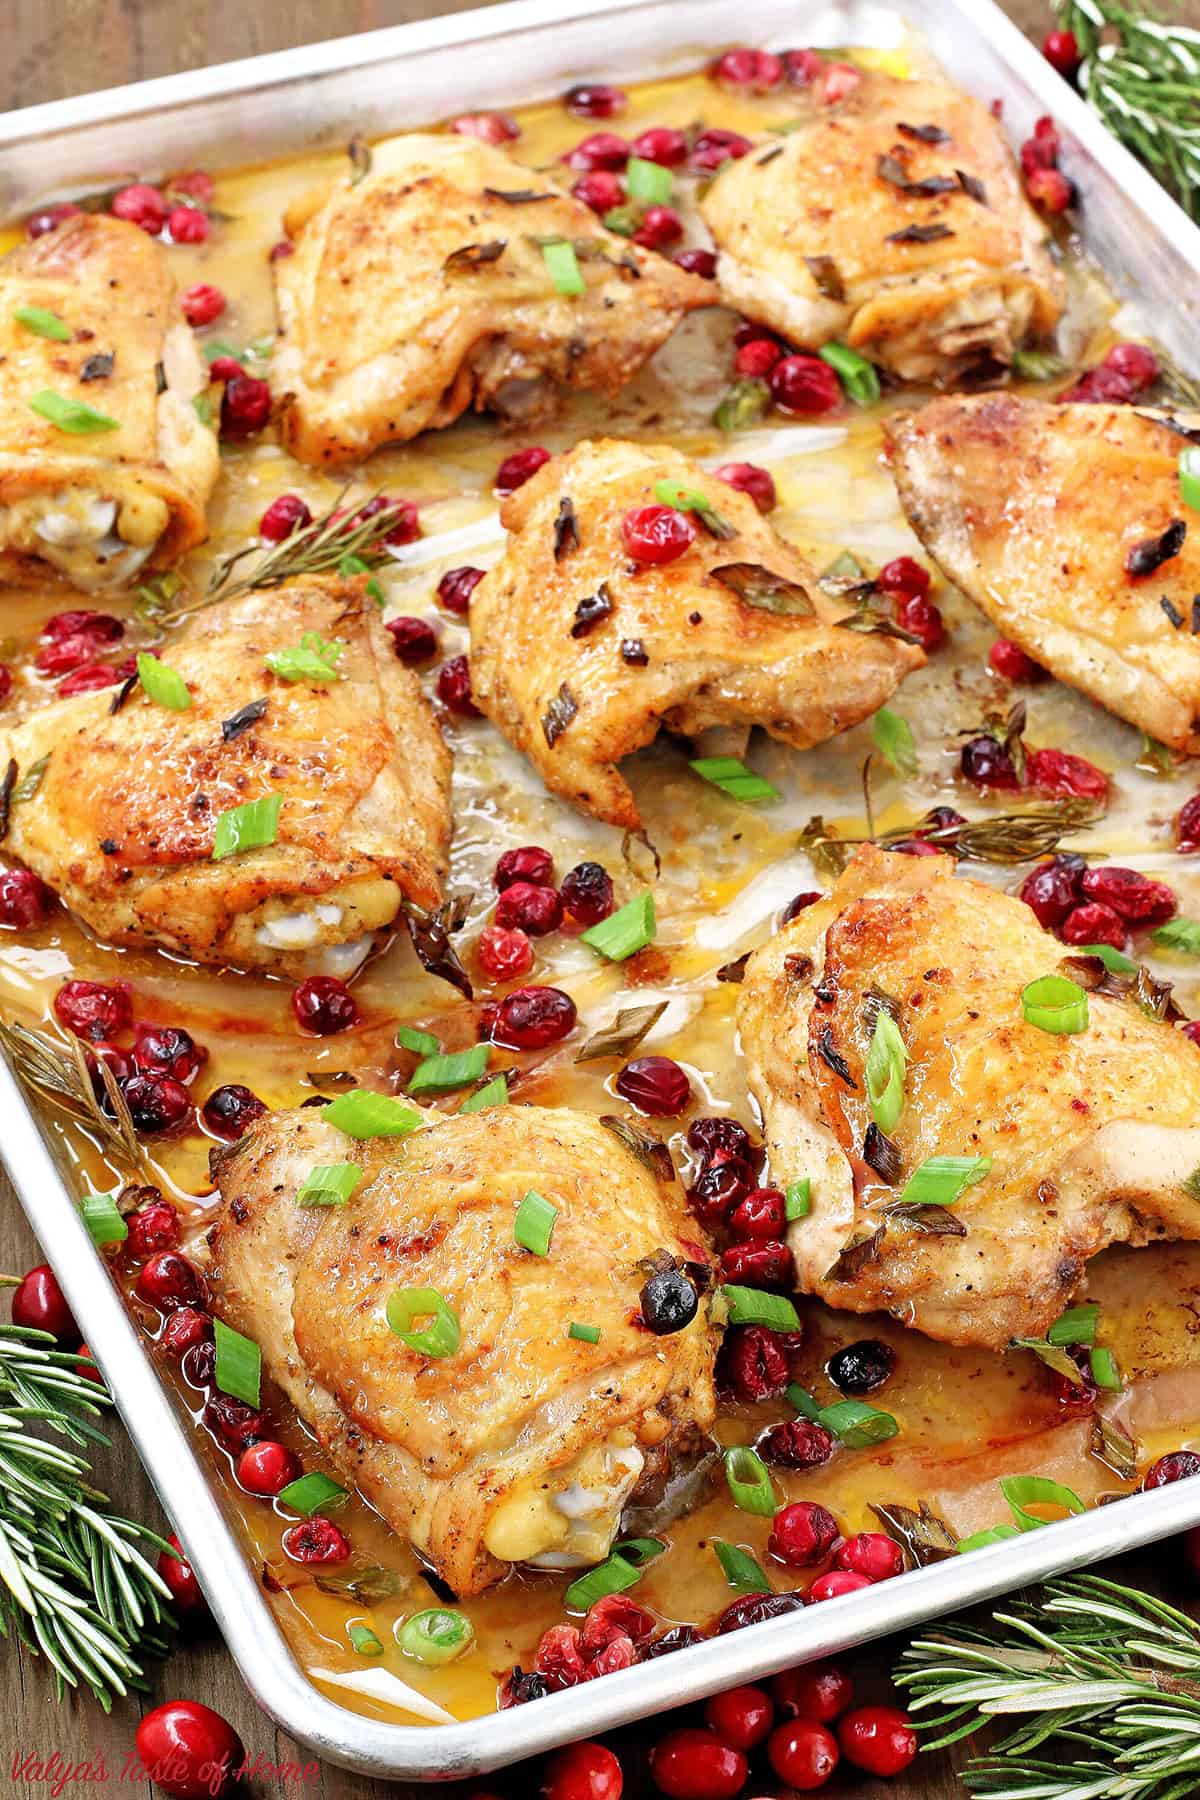 This Rosemary Cranberry Baked Chicken Thighs recipe is the perfect addition to your holiday table that satisfies that craving, as well as adding to the holiday’s feel. The chicken thighs are super juicy, tender on the inside, and loaded with flavor.